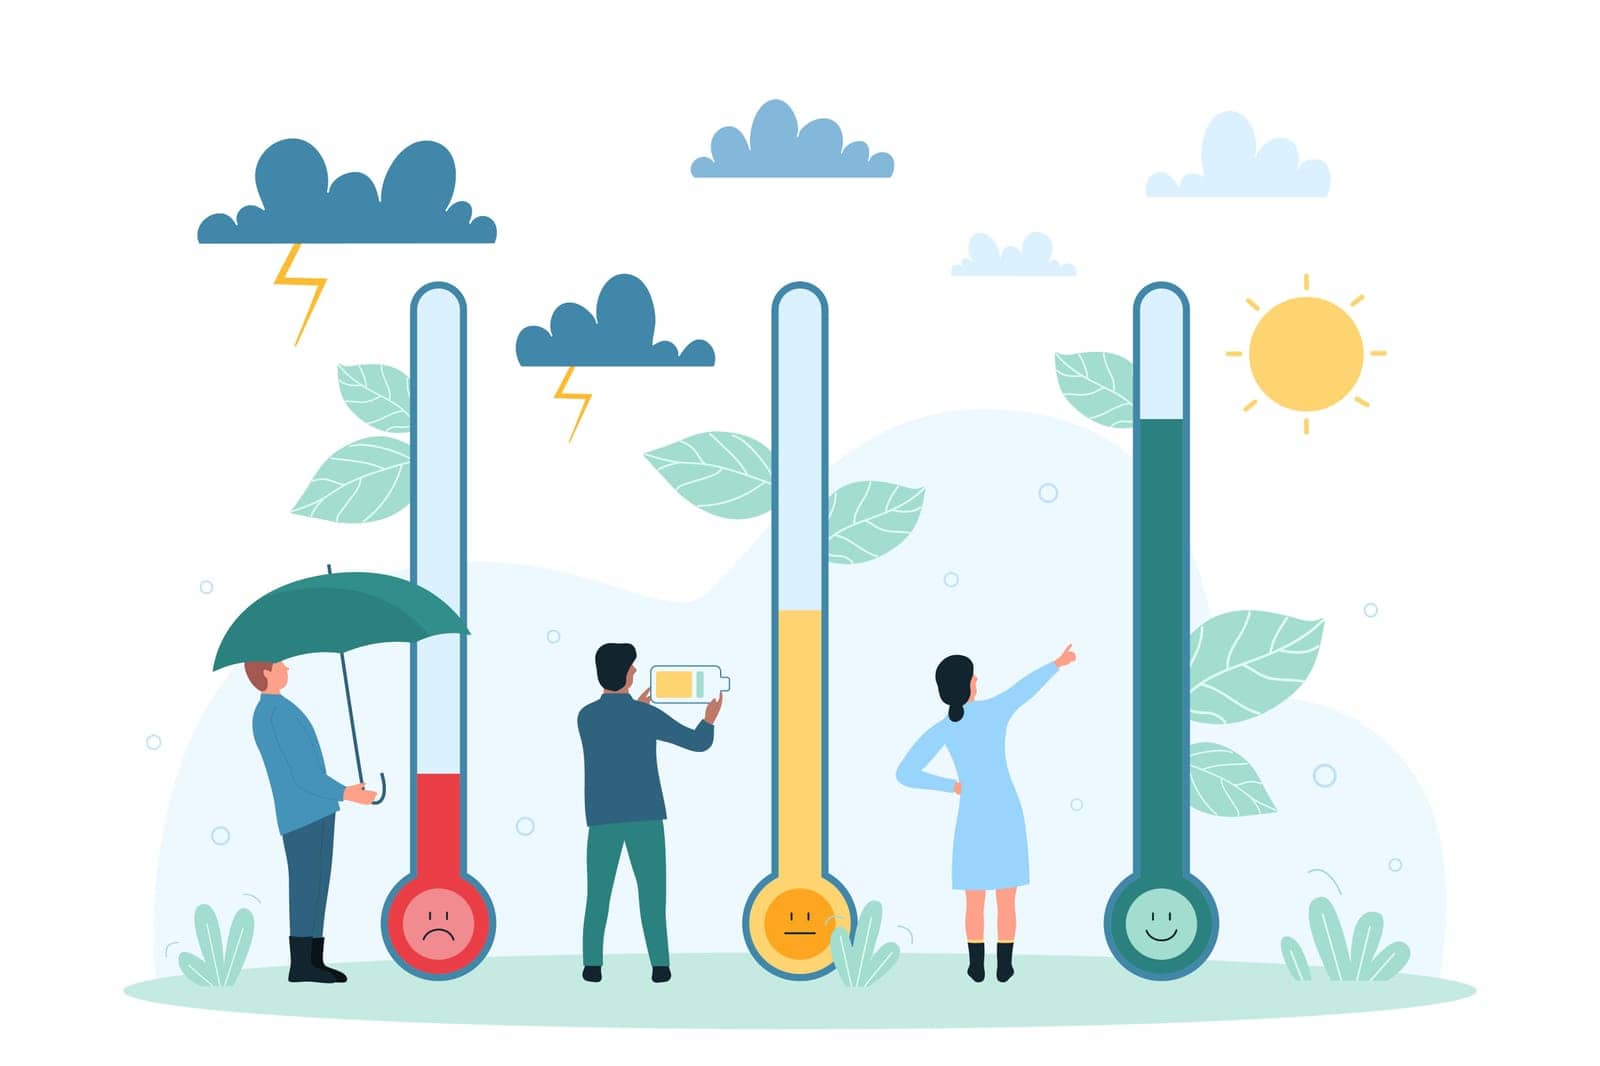 Assessment of stress levels with thermometer vector illustration. Cartoon tiny people rating mood on red, yellow and green color, umbrella and battery to control feelings, gauge burnout and anxiety